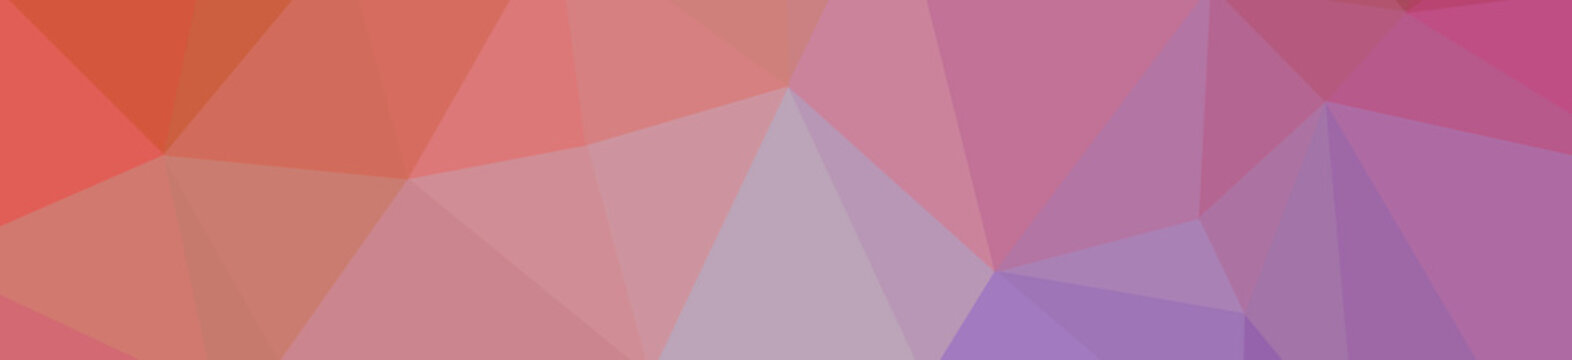 Illustration of purple and red triangle polygon banner background.